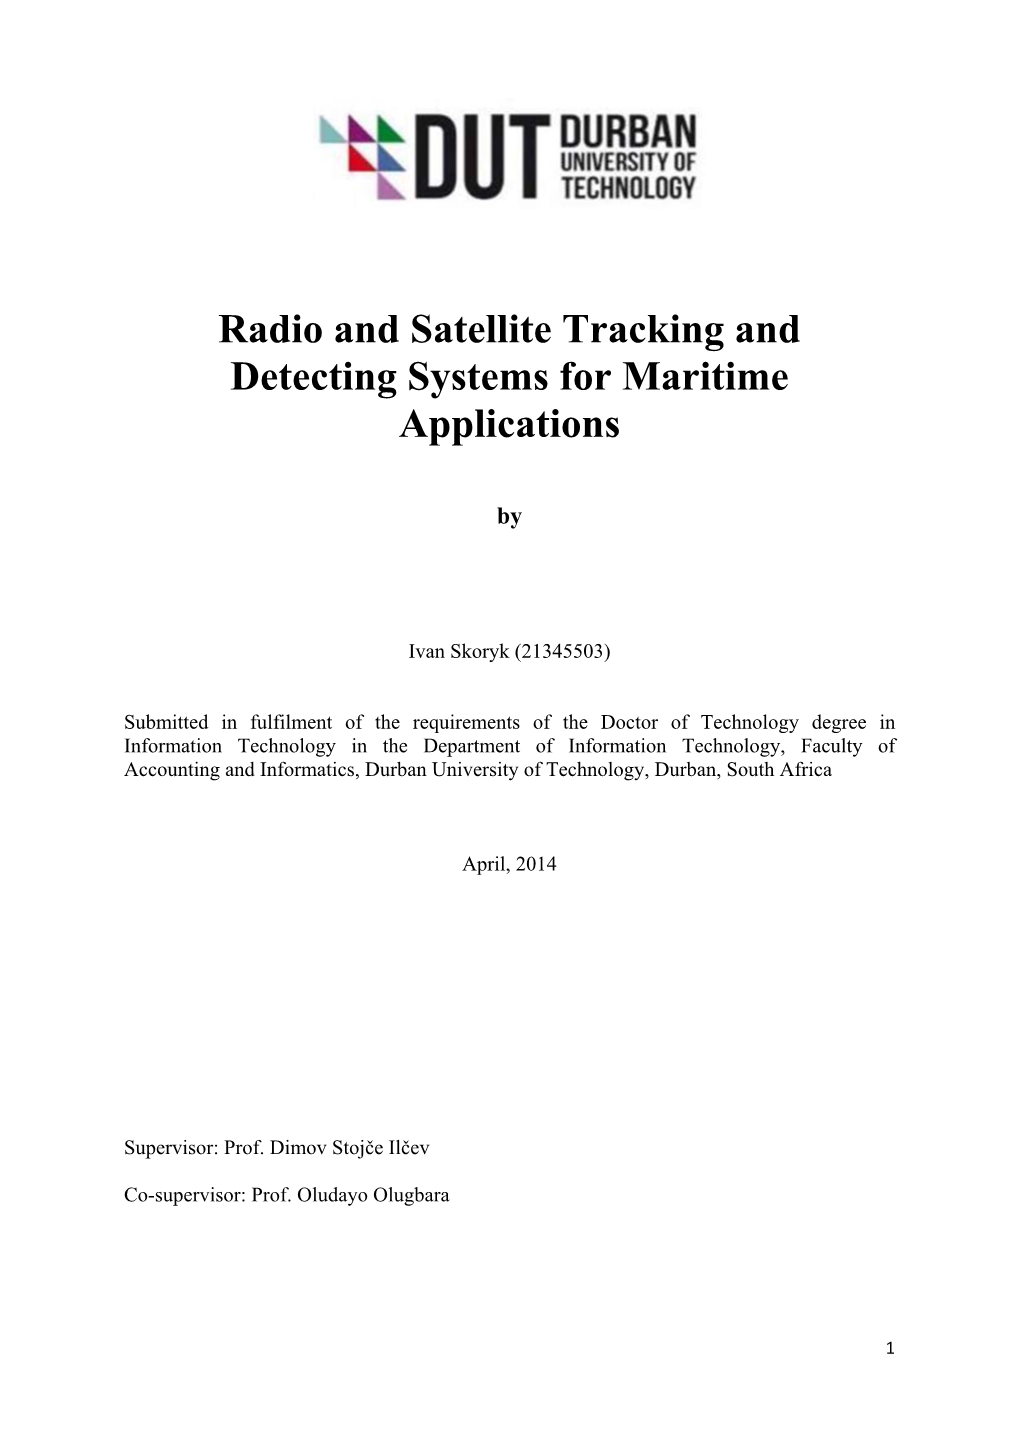 Radio and Satellite Tracking and Detecting Systems for Maritime Applications